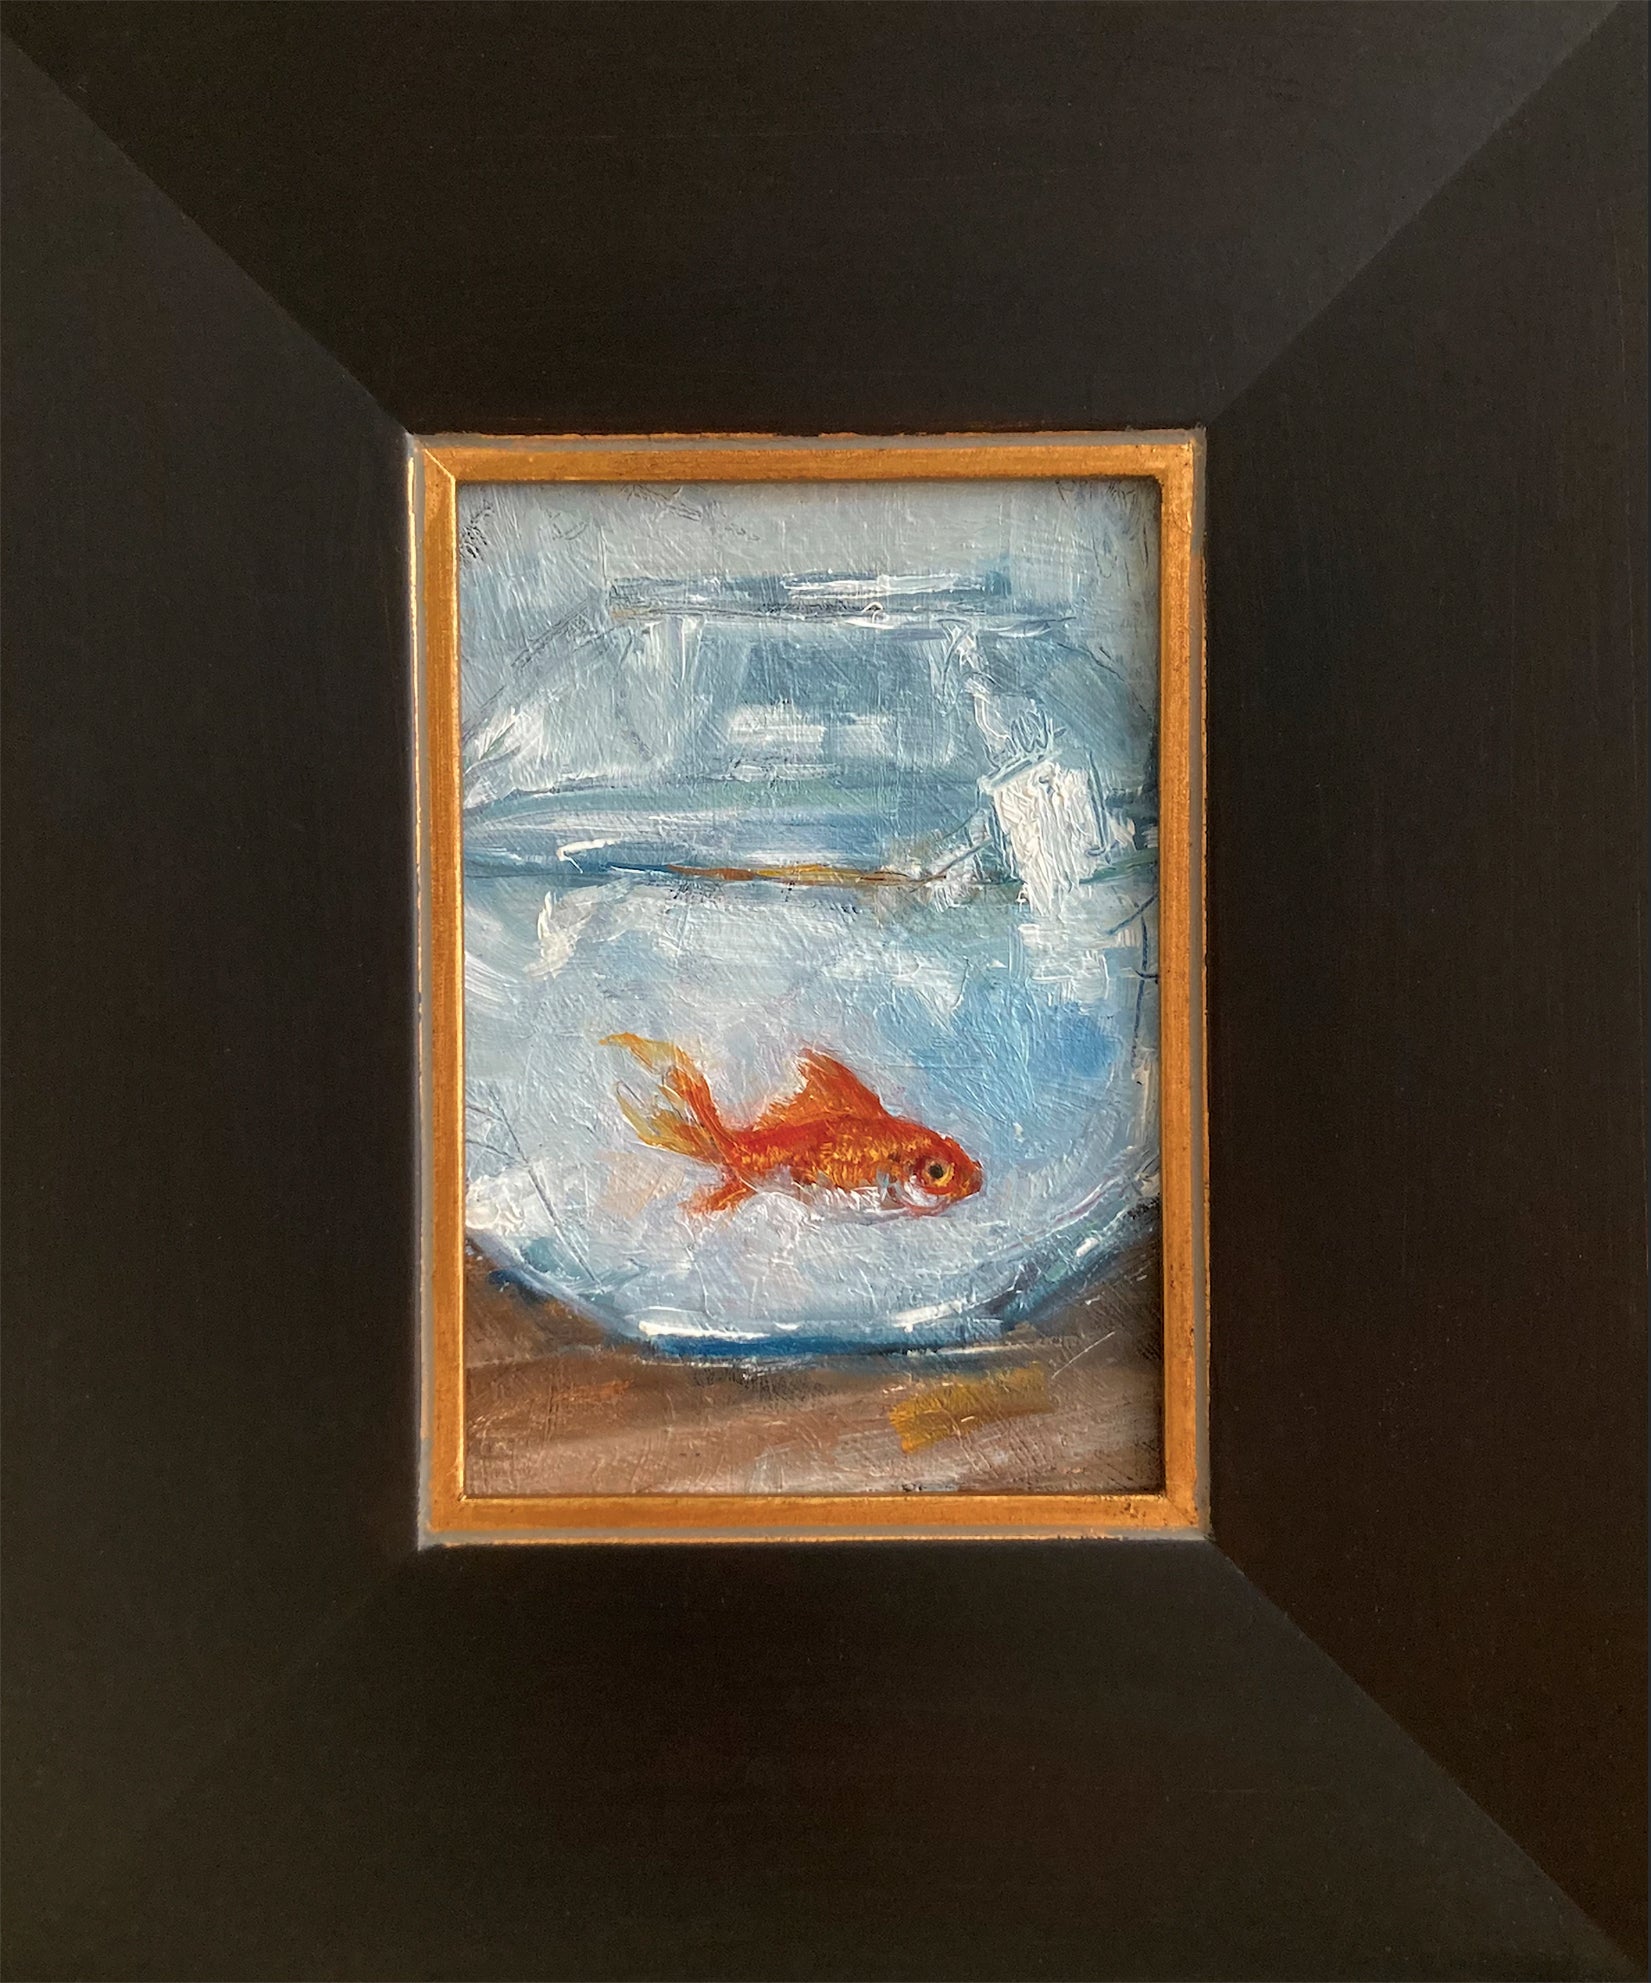 Oil painting of goldfish swimming in round bowl with dark wood frame with gold trim